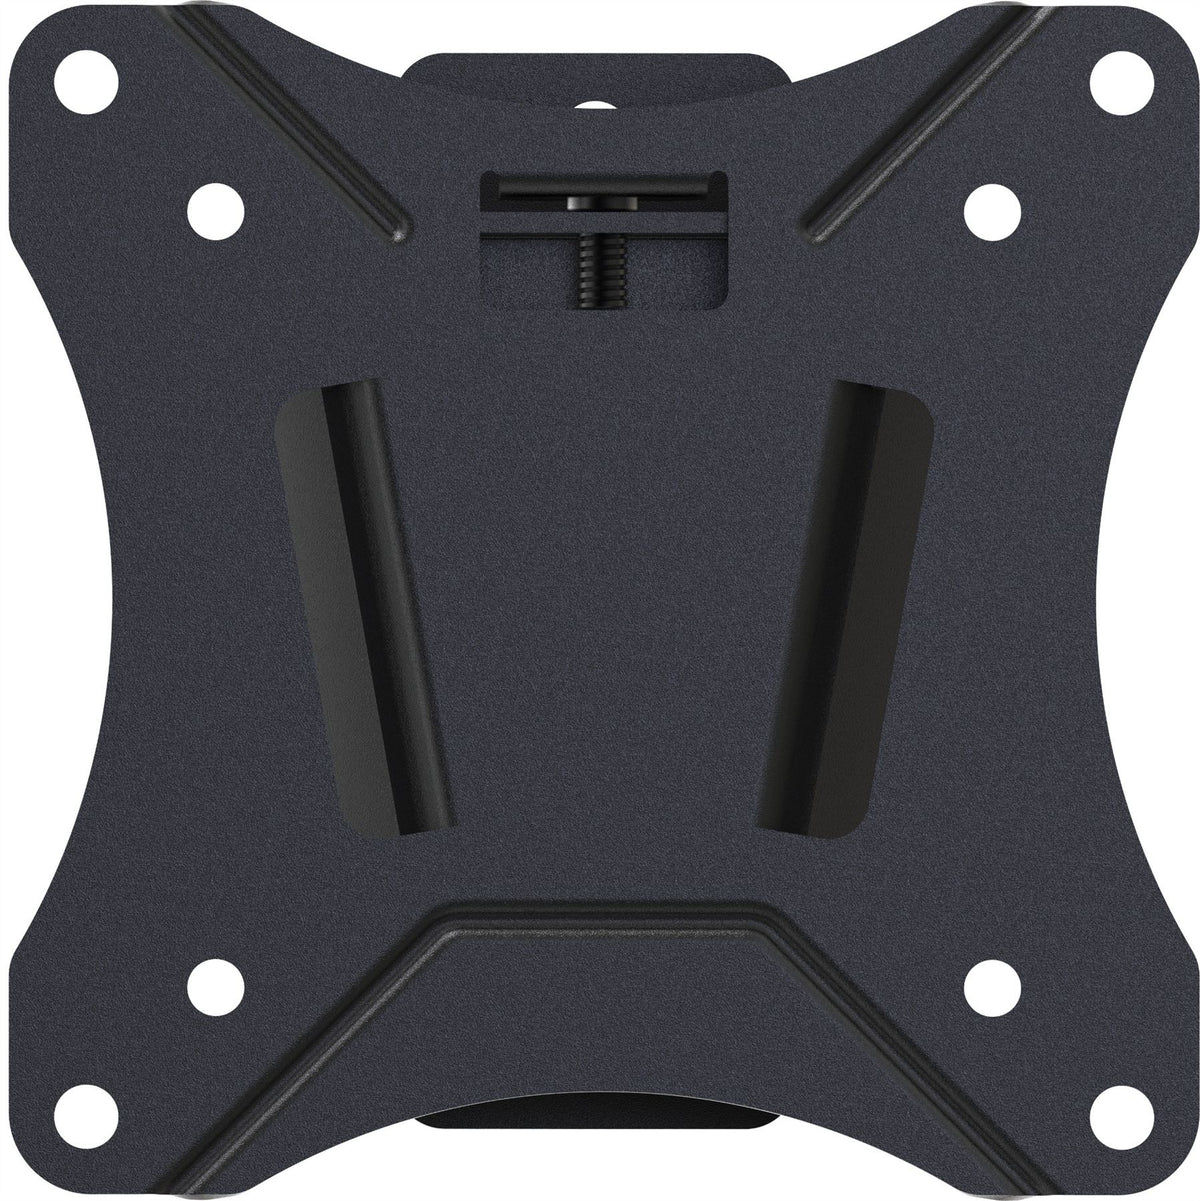 Vision VFM-W1X1TV2 monitor mount / stand 86.4 cm (34) Black Wall&quot;